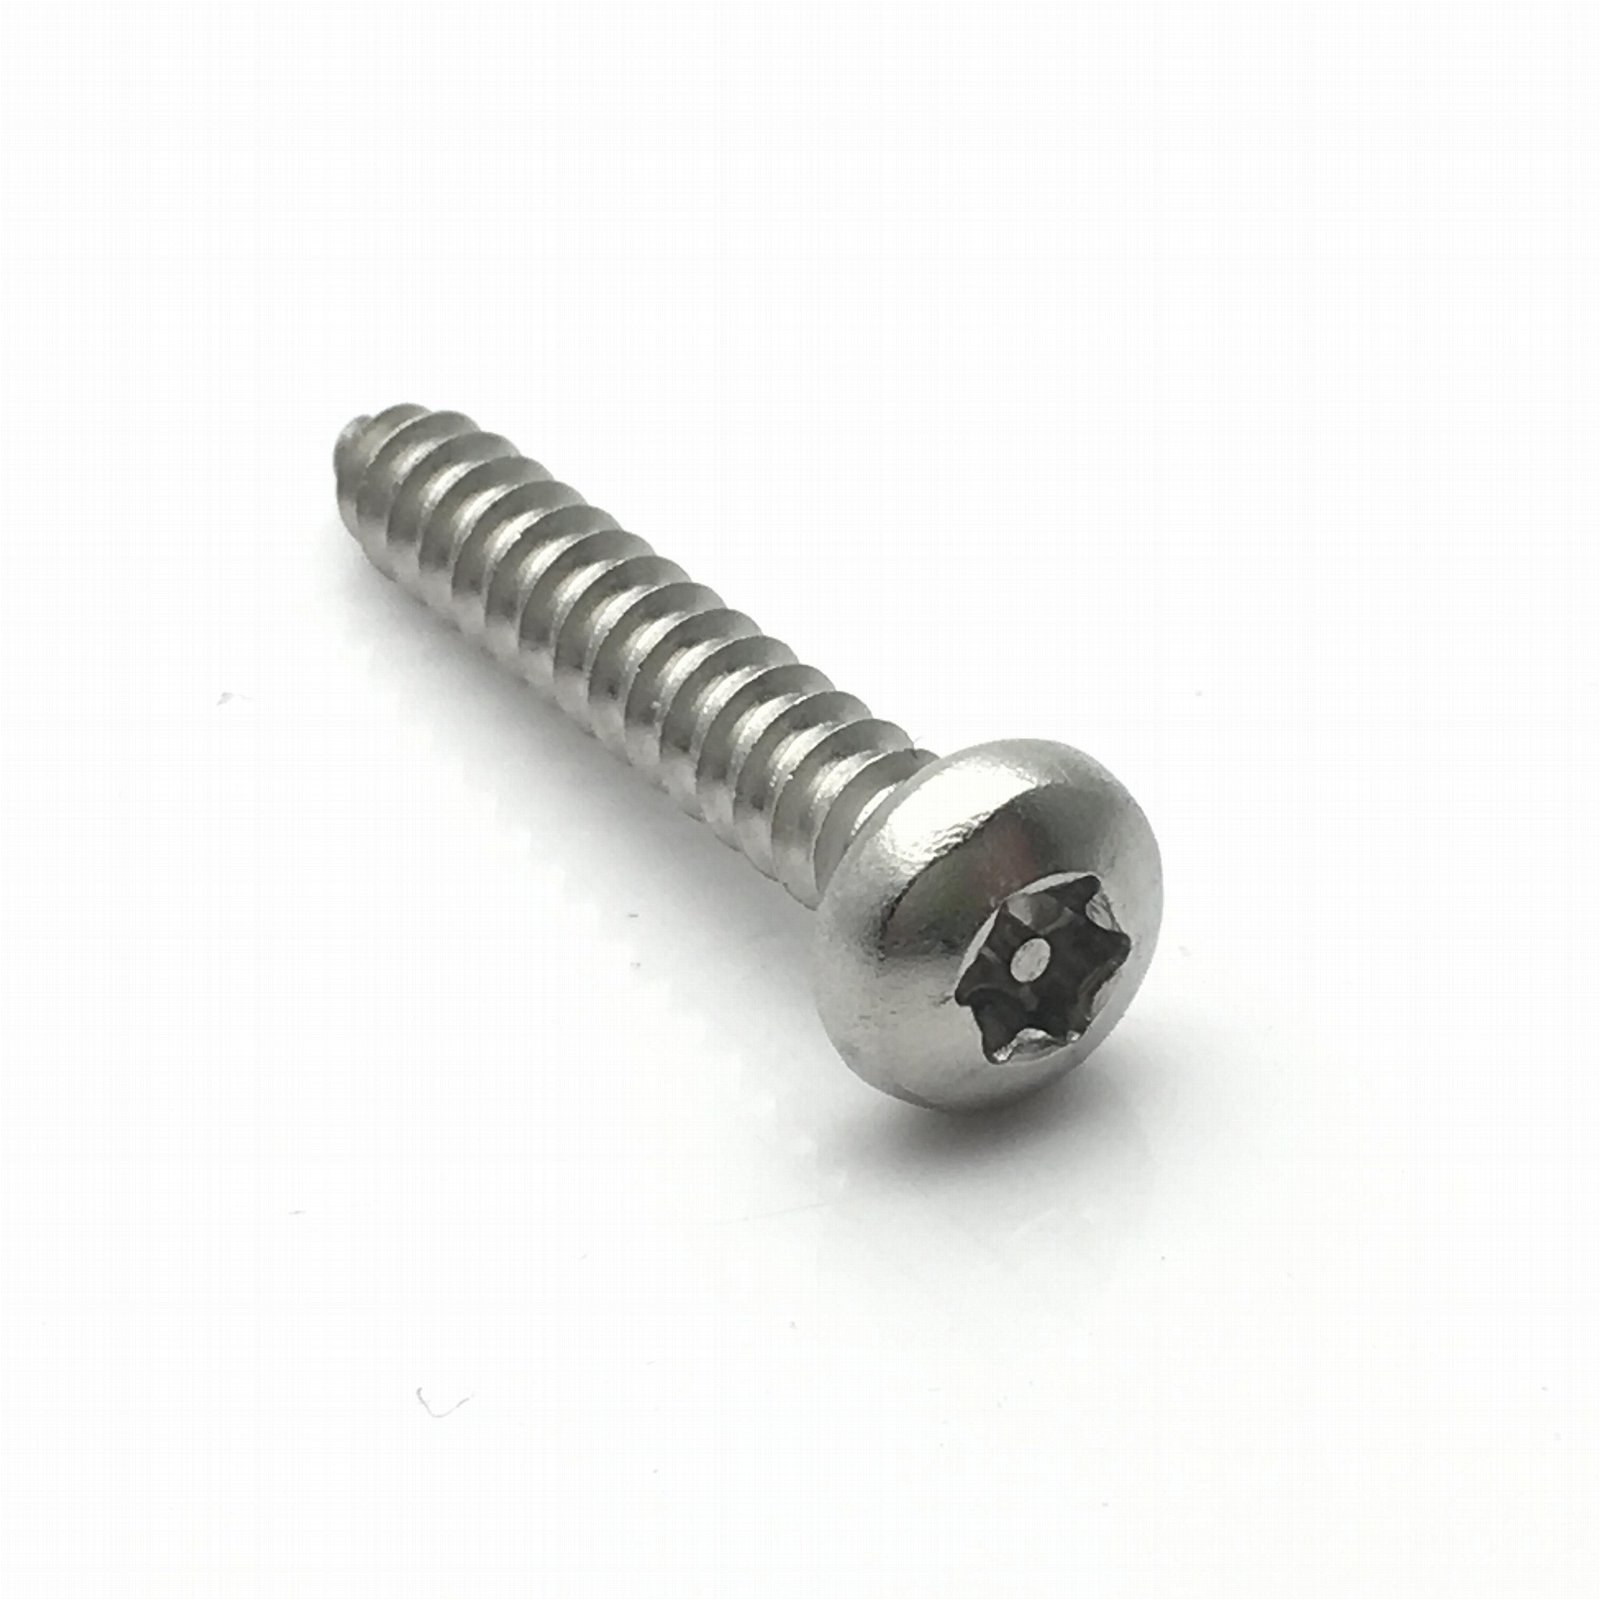  Stainless steel 304 Torx Pin-In pan head drive tapping screws 4